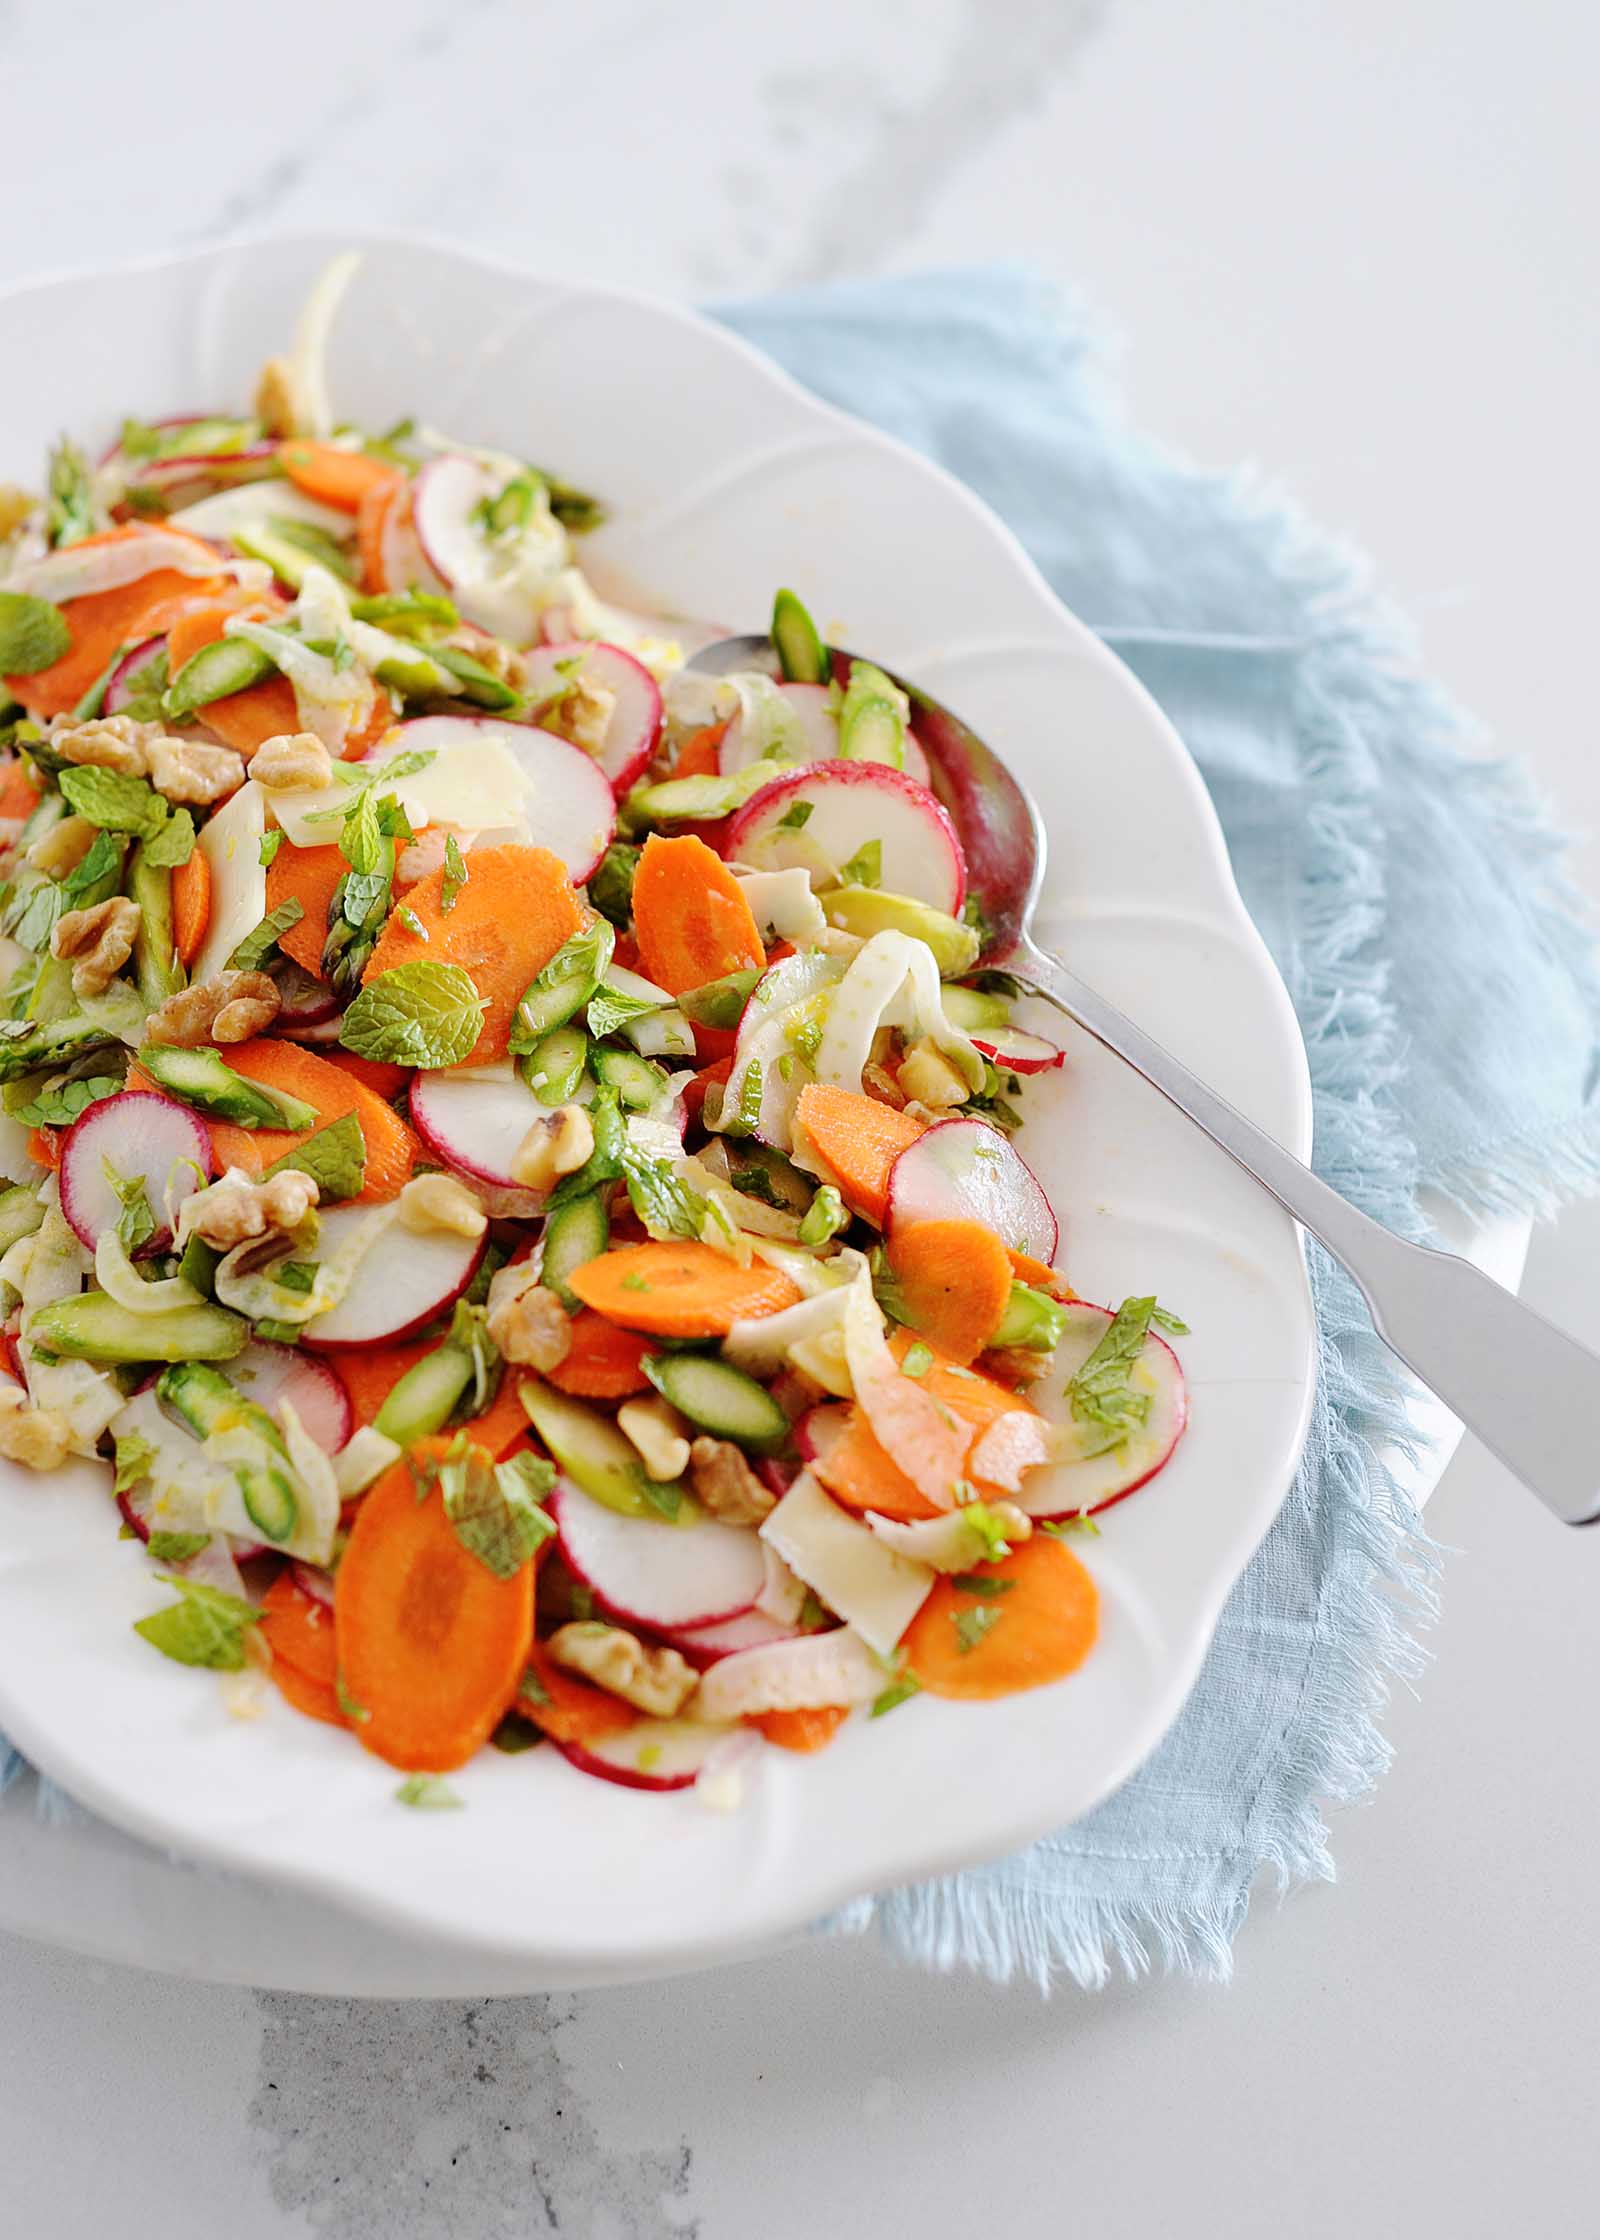 Overhead angled view of a white platter with a shaved vegetable salad of thinly sliced carrot, radish, fennel and asparagus mixed together. Mint leaves are scattered around the top. The platter is on a light blue linen on a white counter and a silver serving spoon is on the right side of the platter.